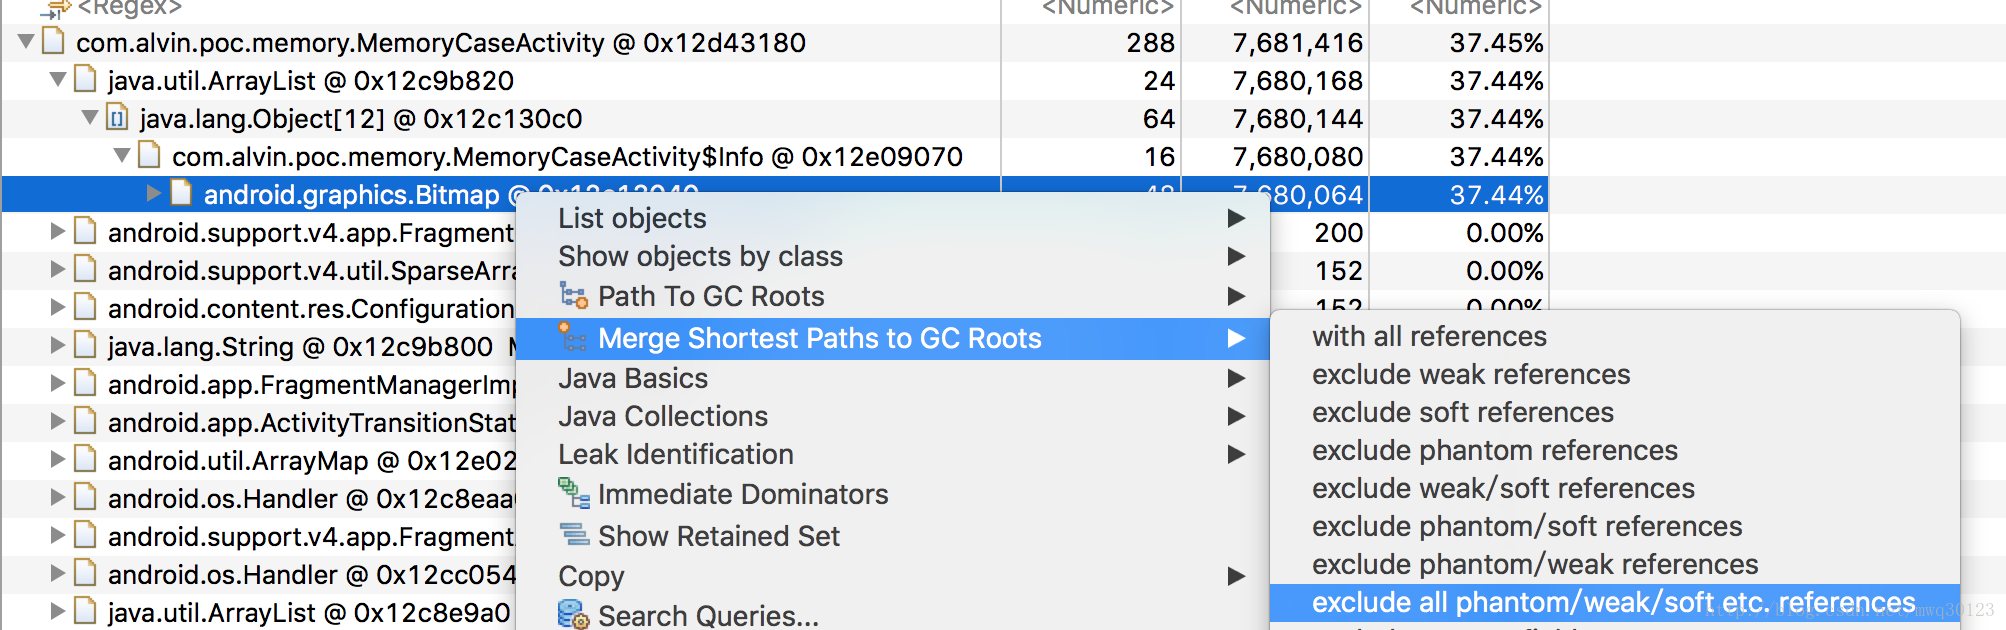 Merge Shortest Paths to GC Roots